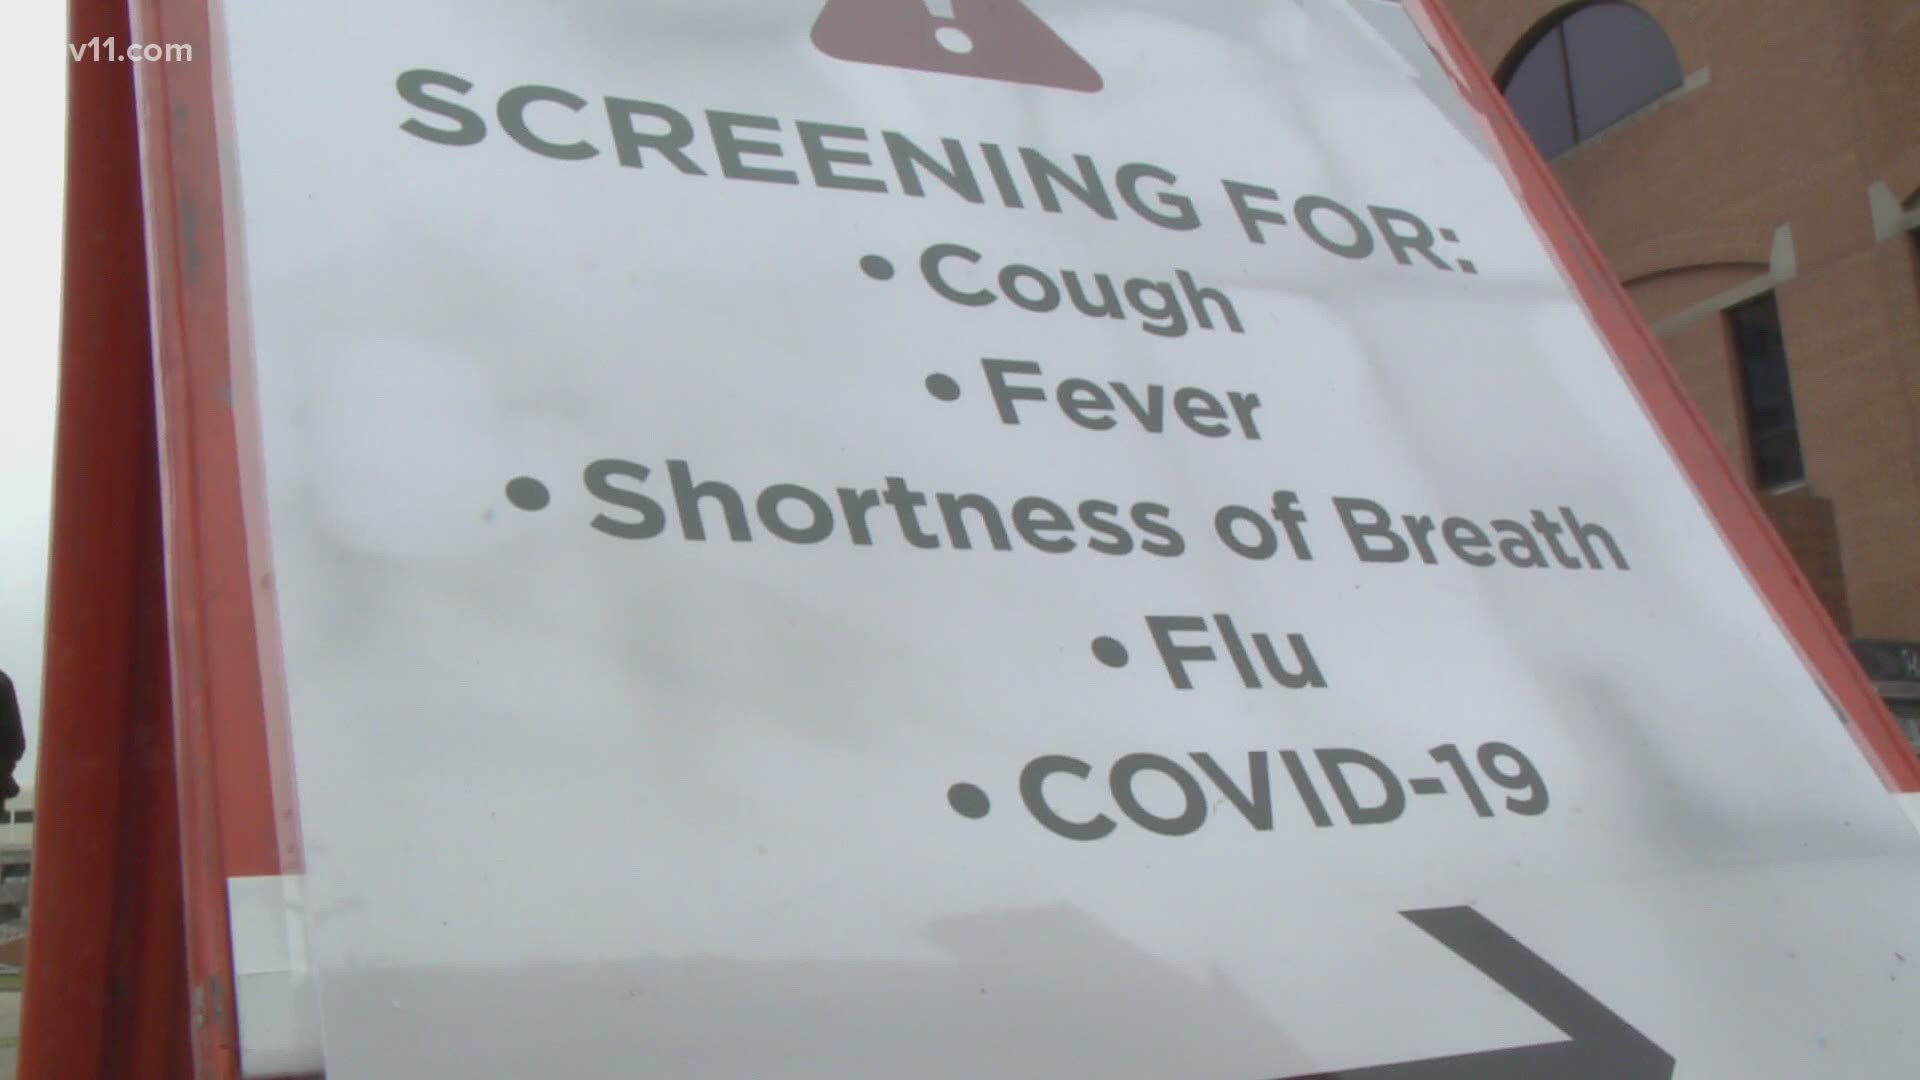 The Arkansas Department of Health wants to see more people get tested, saying the turn around time is much quicker than it was weeks ago.